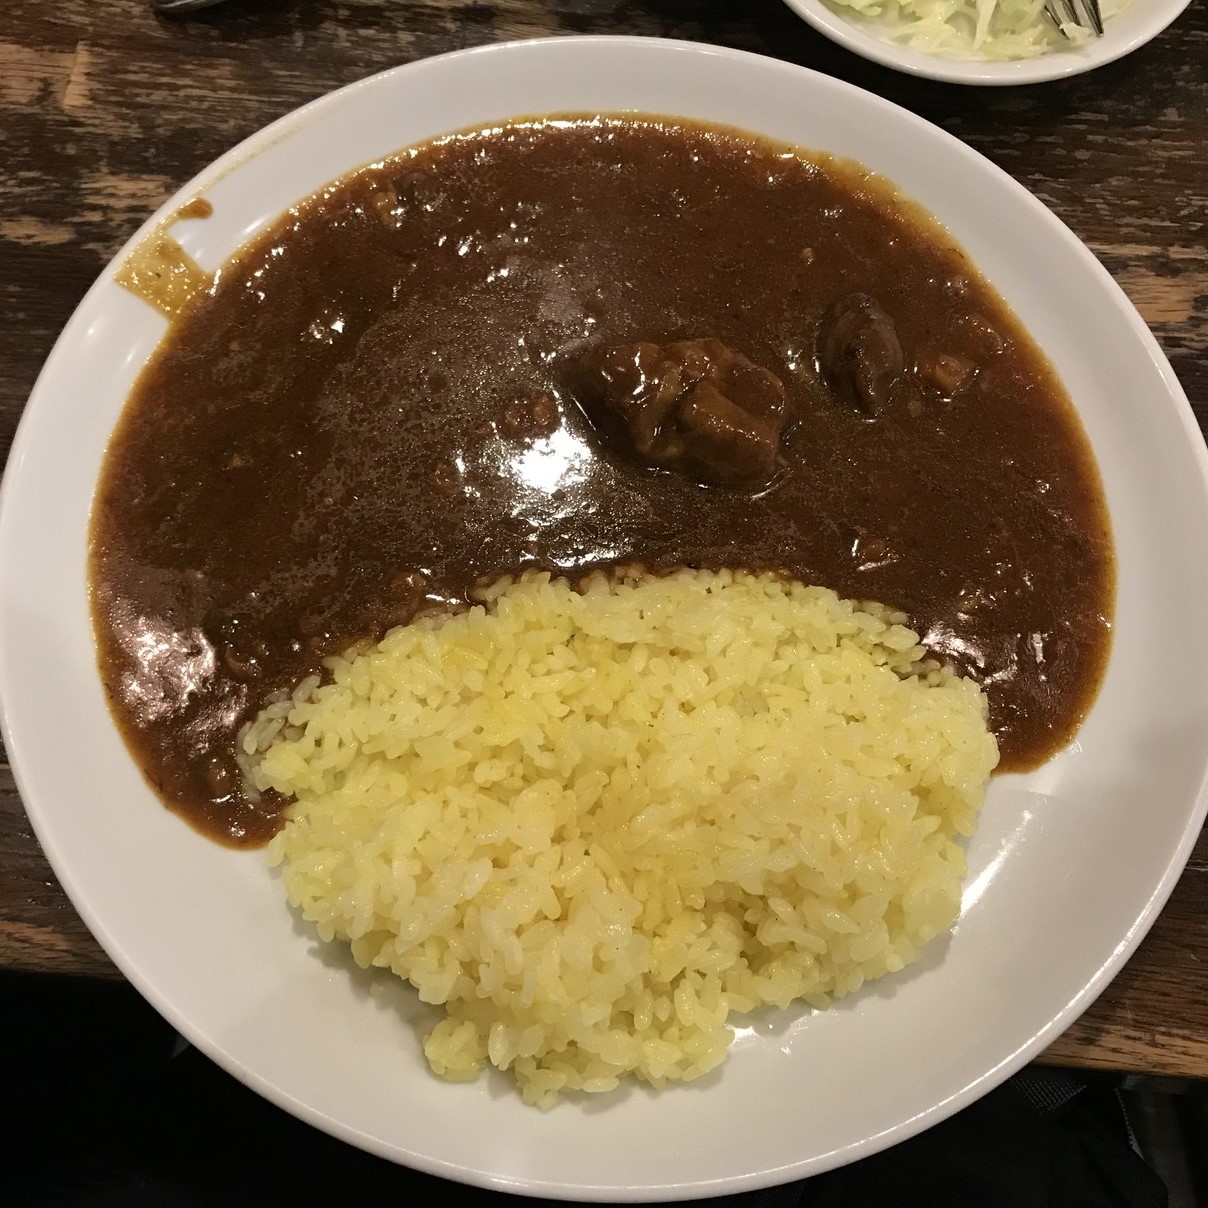 Savoy in Kobe for good Japanese curry rice